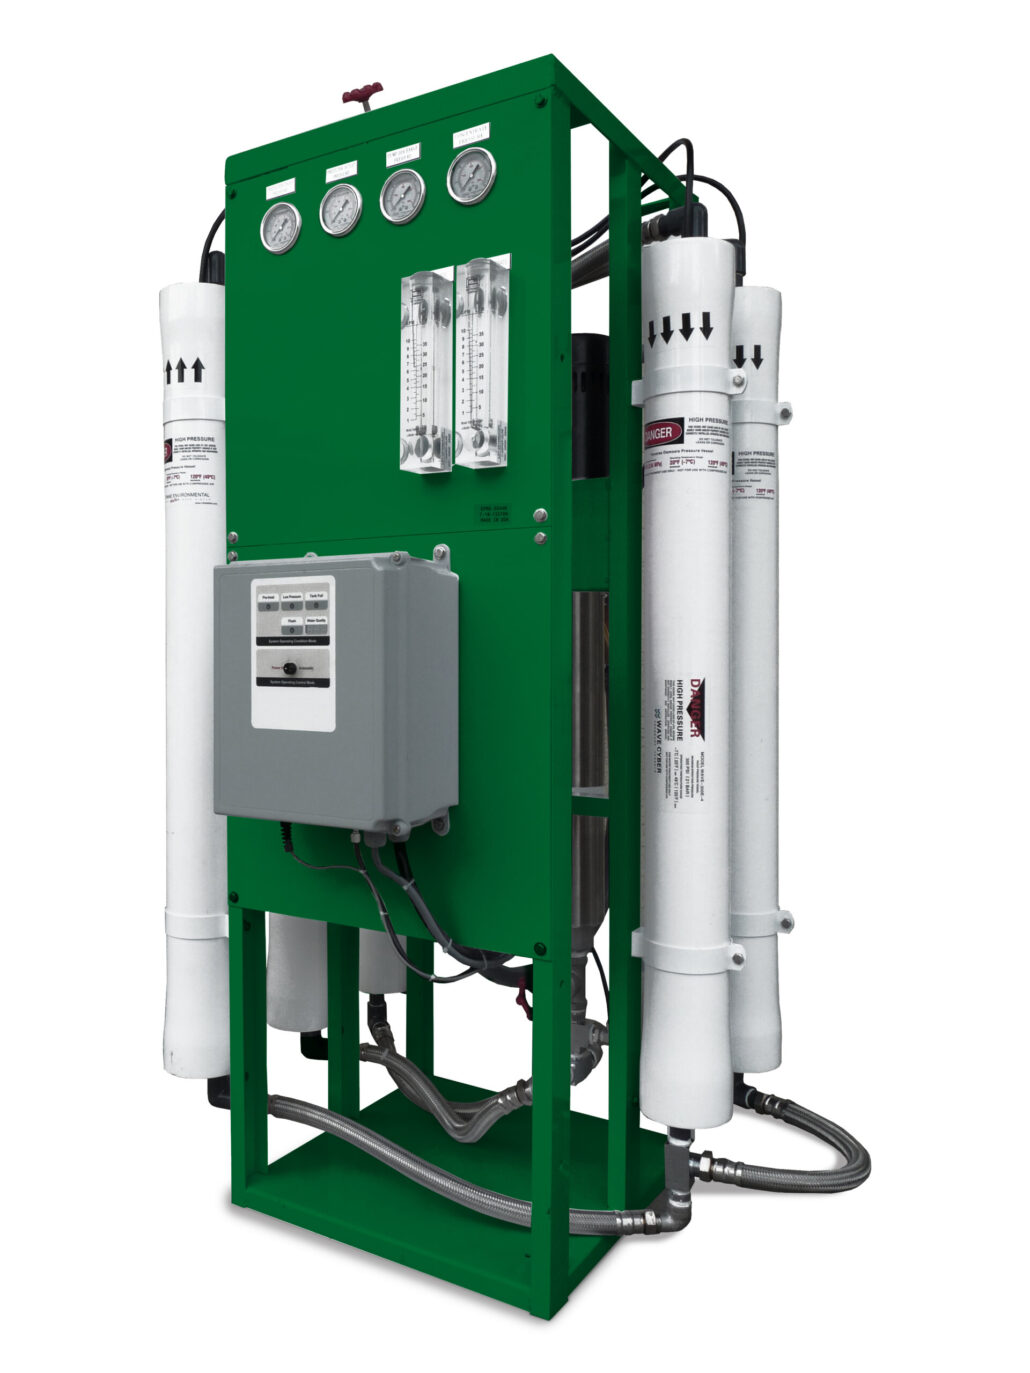 A product image with a white background of an EPRO reverse osmosis water filtration system consisting of a green metal frame with five vertically oriented water filters connected by metal hoses with an electrical panel with gauges